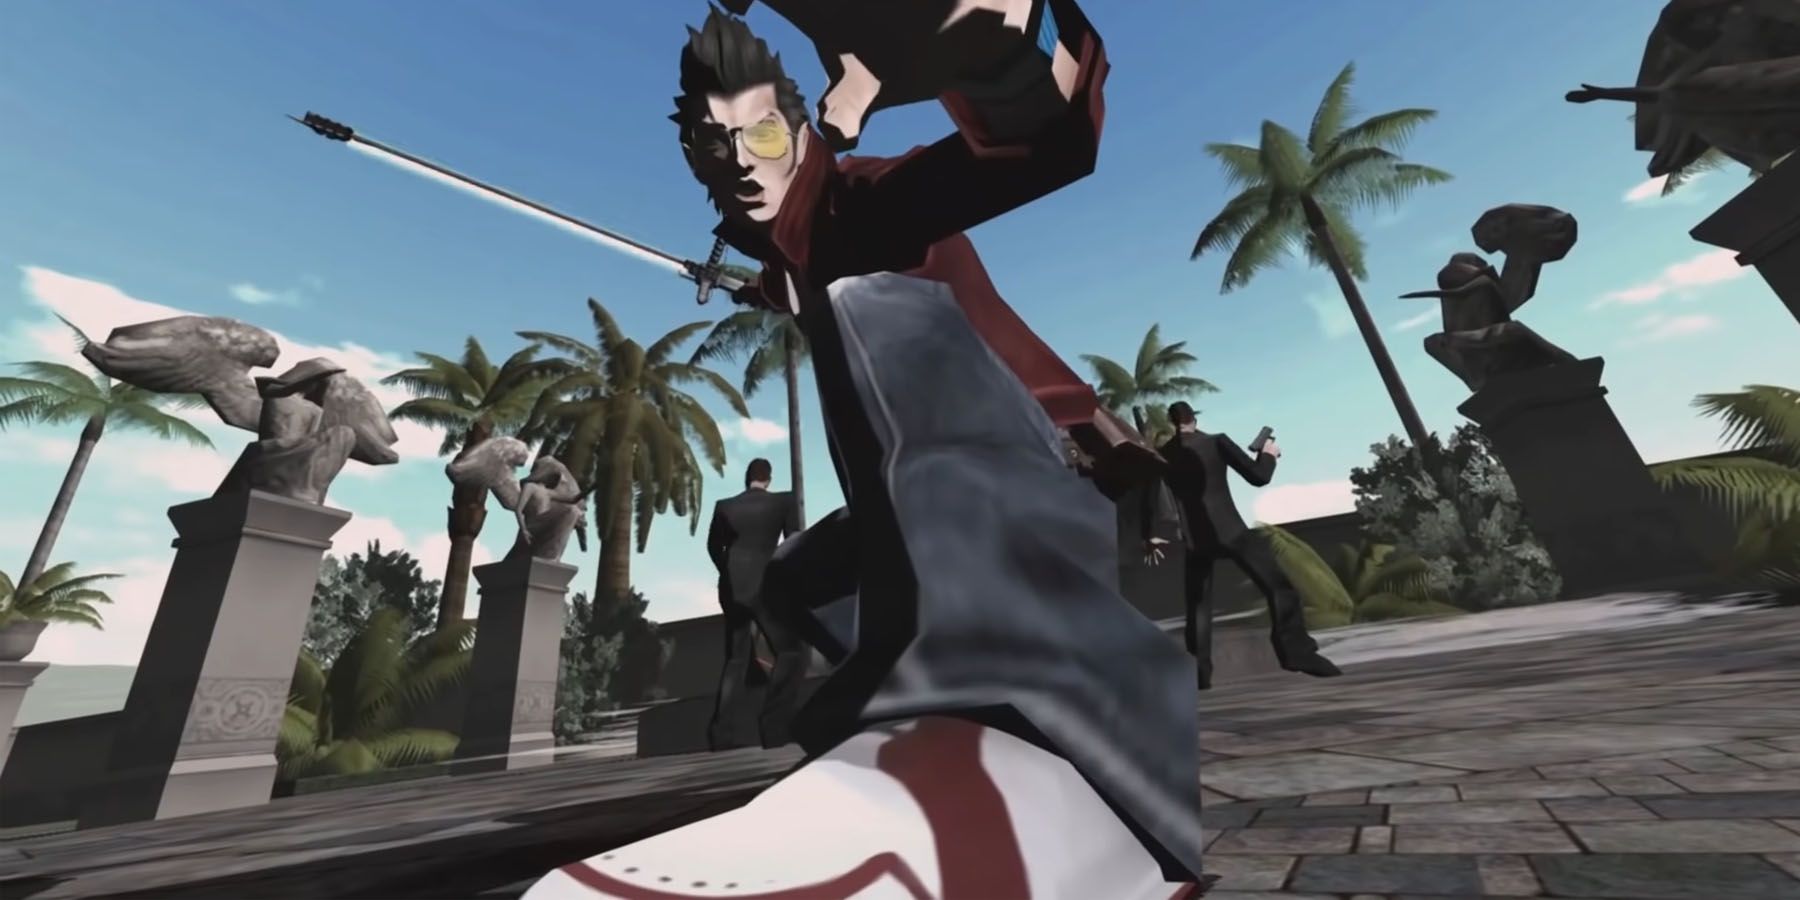 More Travis Touchdown Heroes